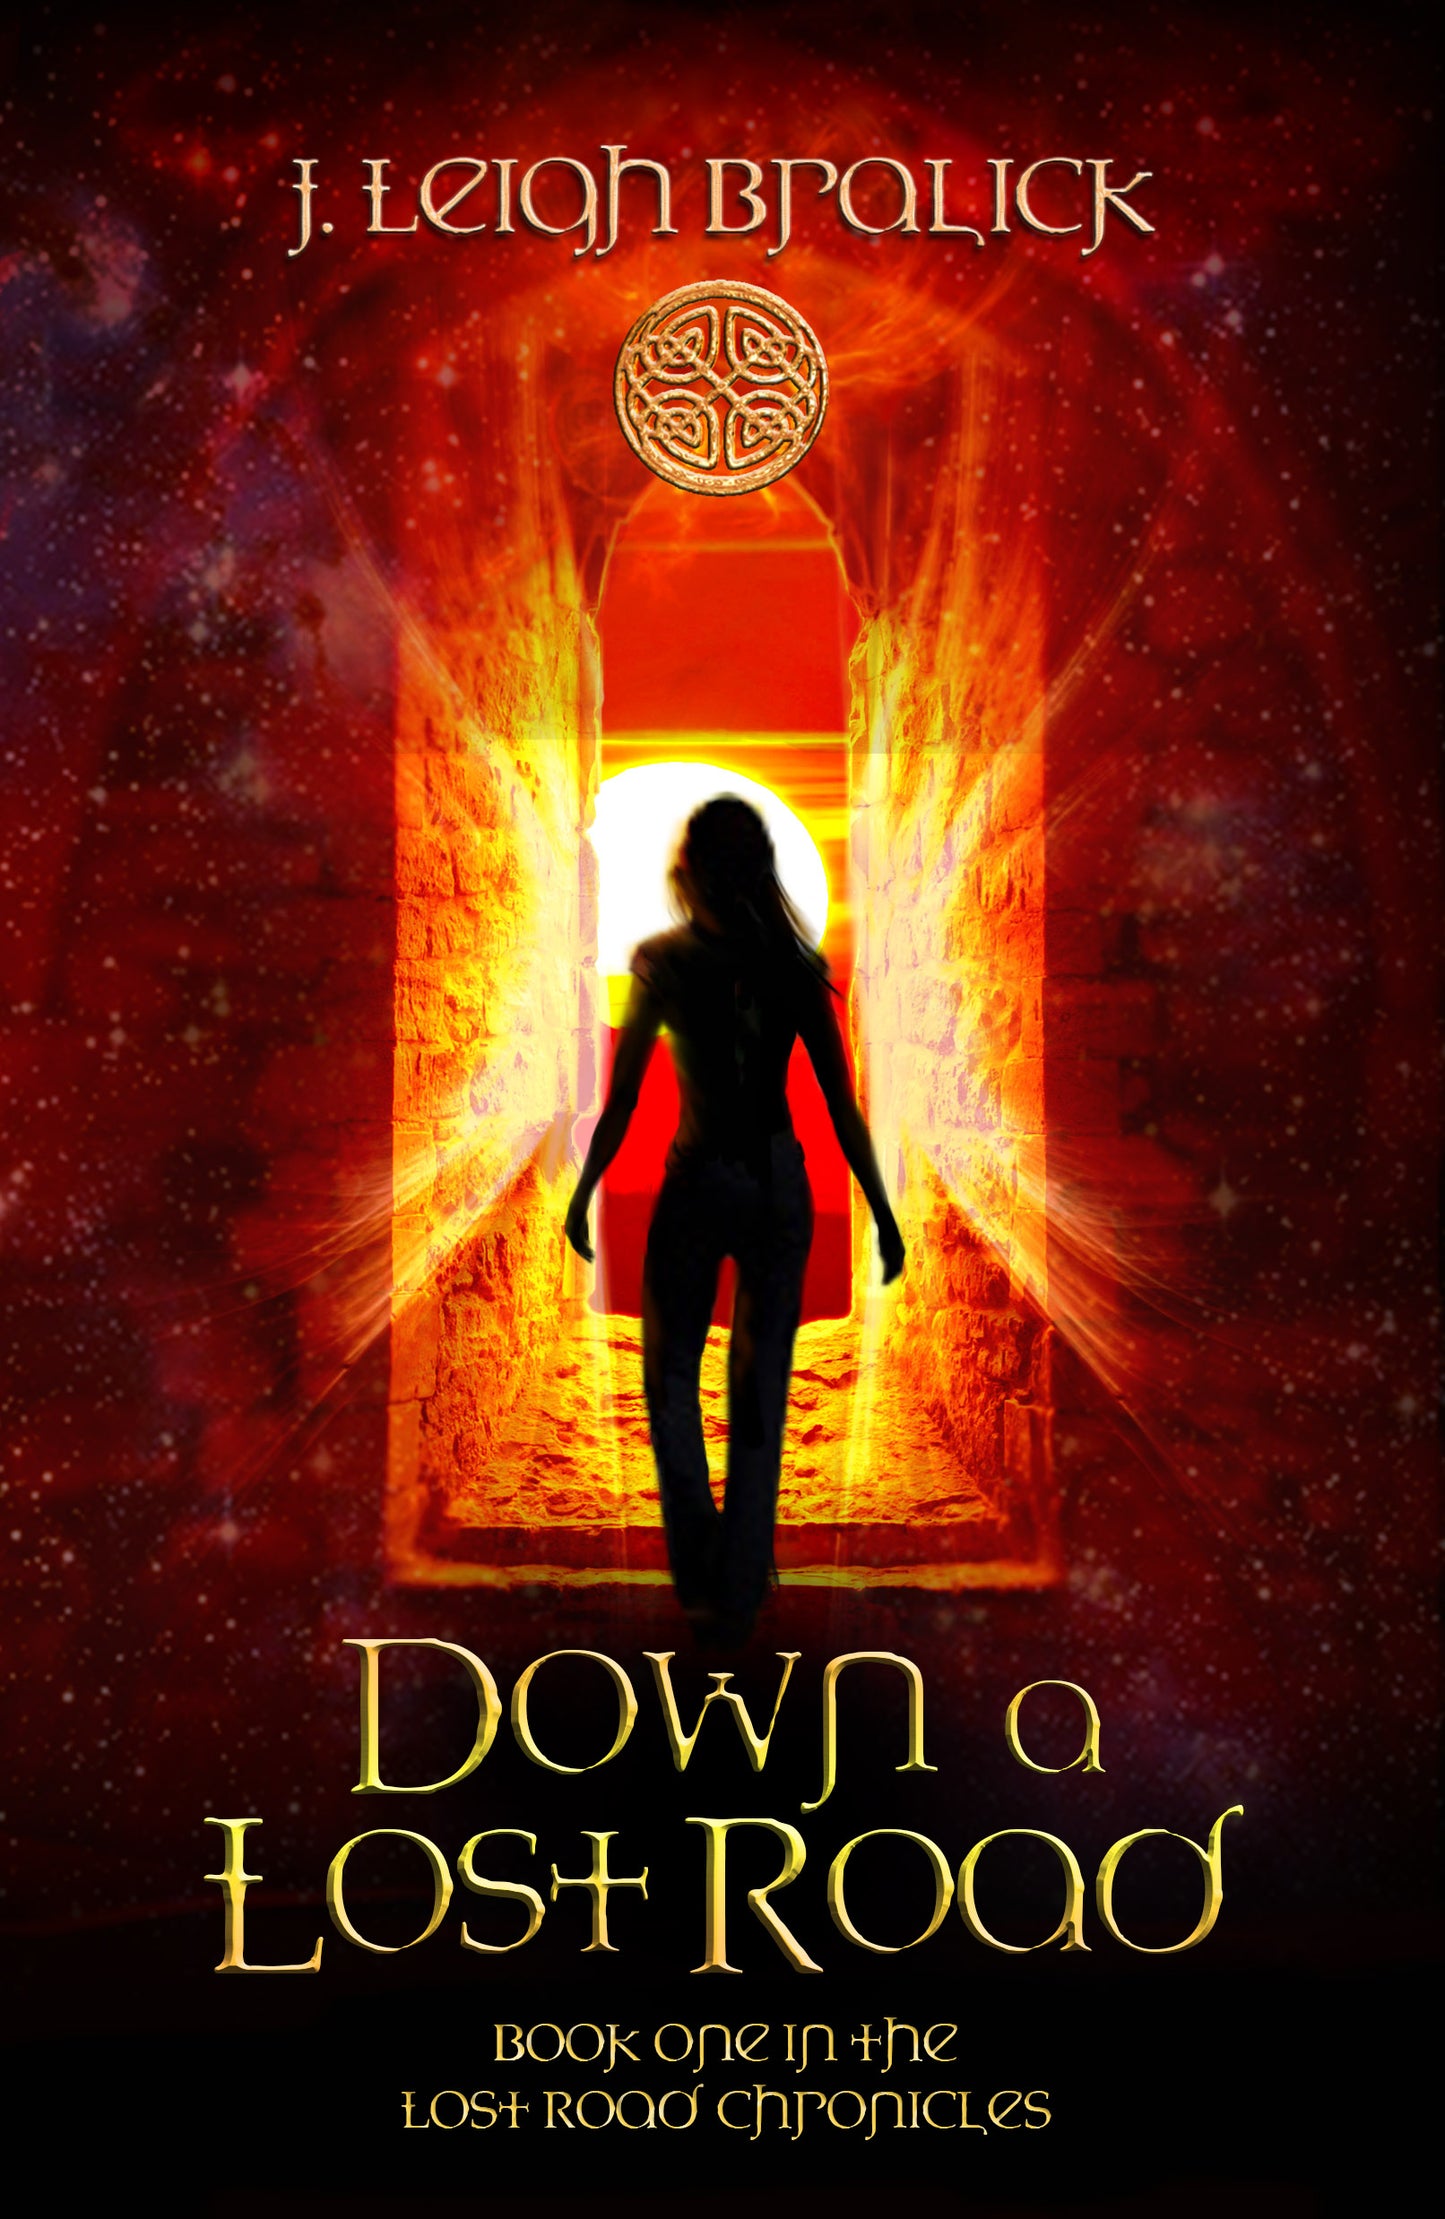 Down a Lost Road (Lost Road Chronicles #1) - Paperback